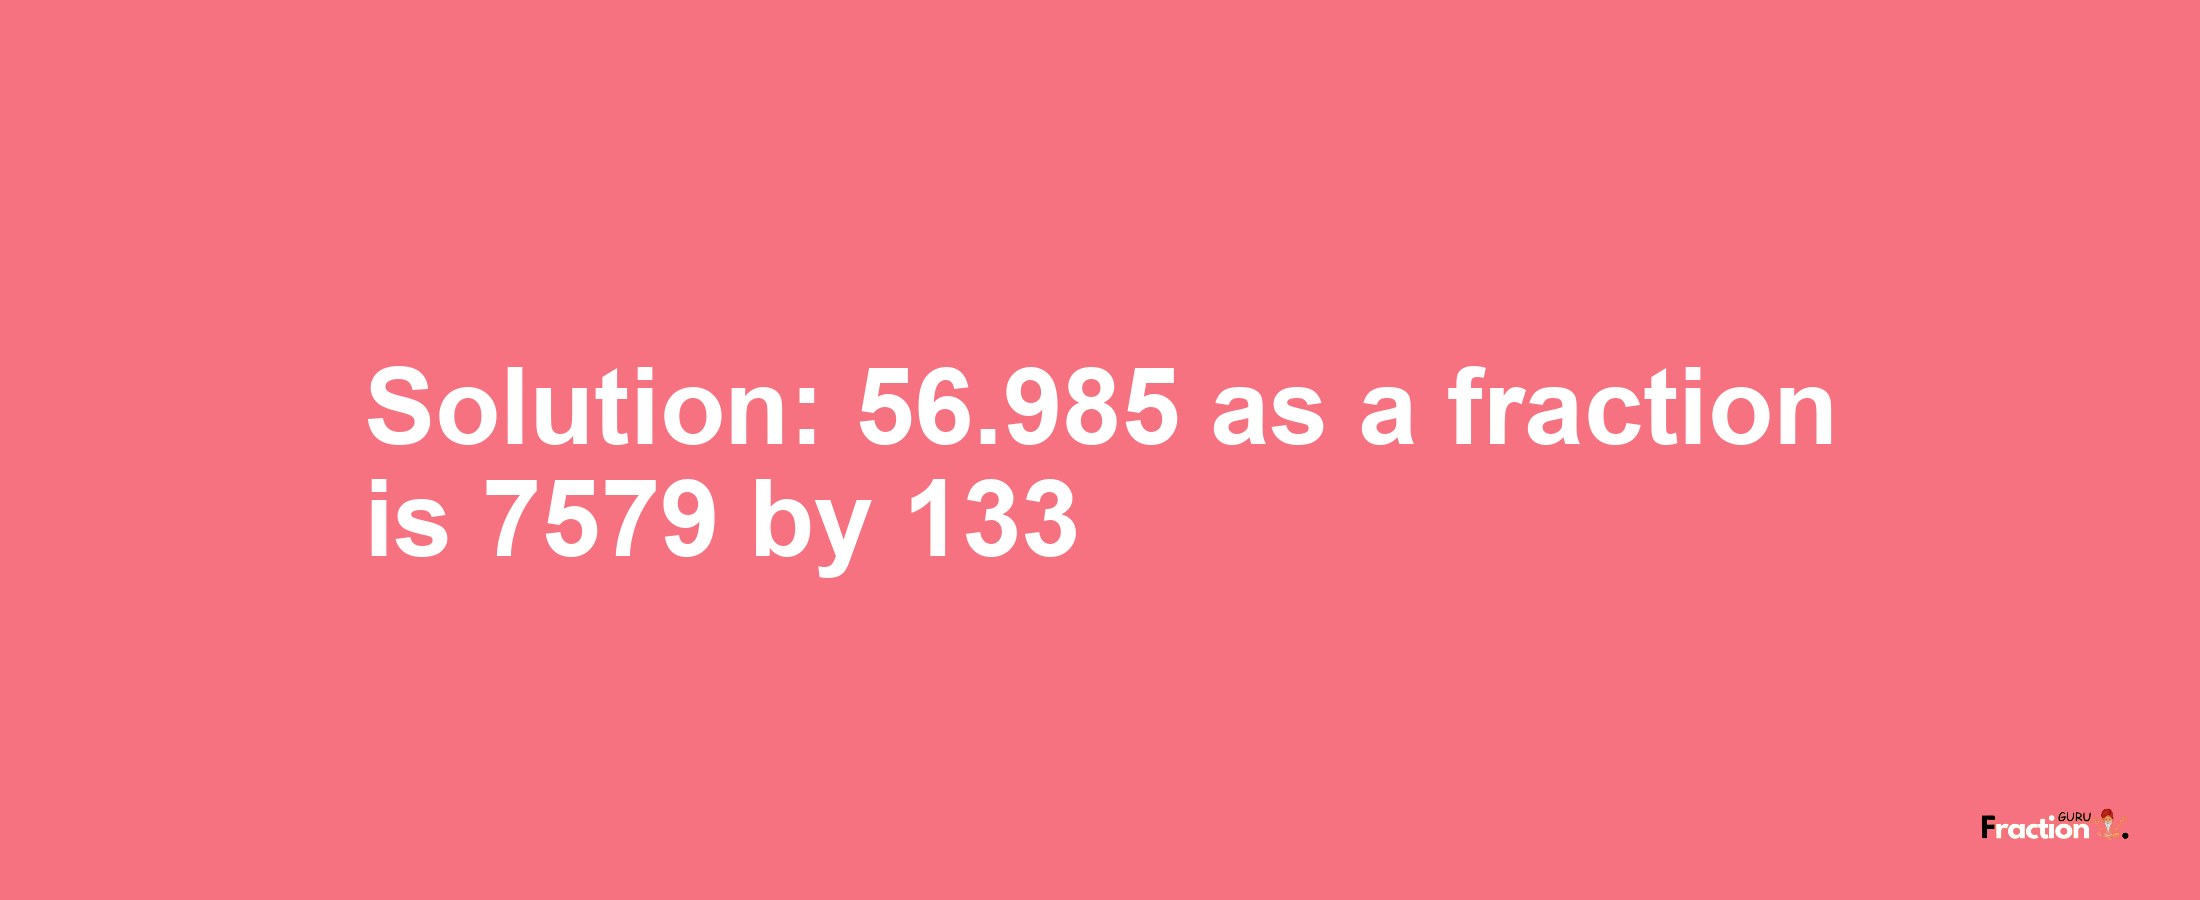 Solution:56.985 as a fraction is 7579/133